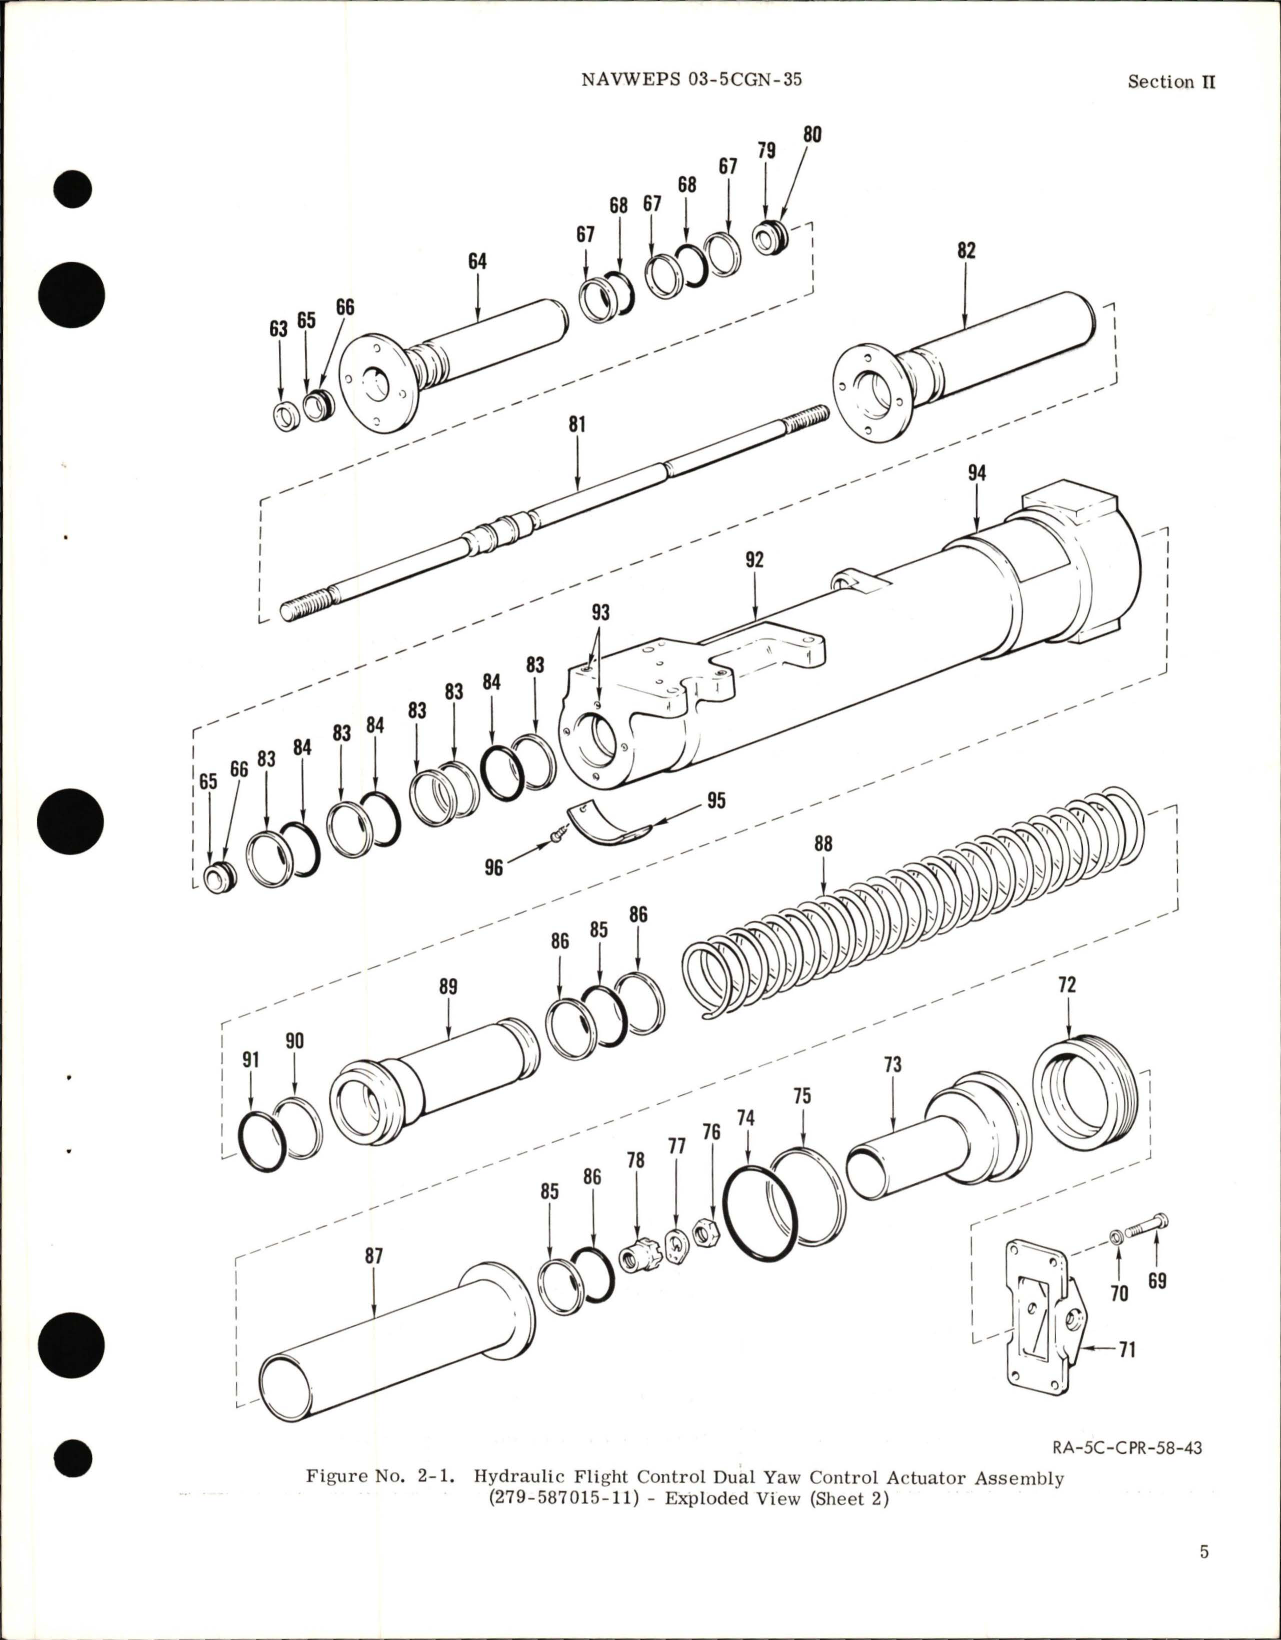 Sample page 7 from AirCorps Library document: Overhaul Instructions for Hydraulic Flight Control, Dual Yaw Control Actuator Assembly - Part 279-587015-11 